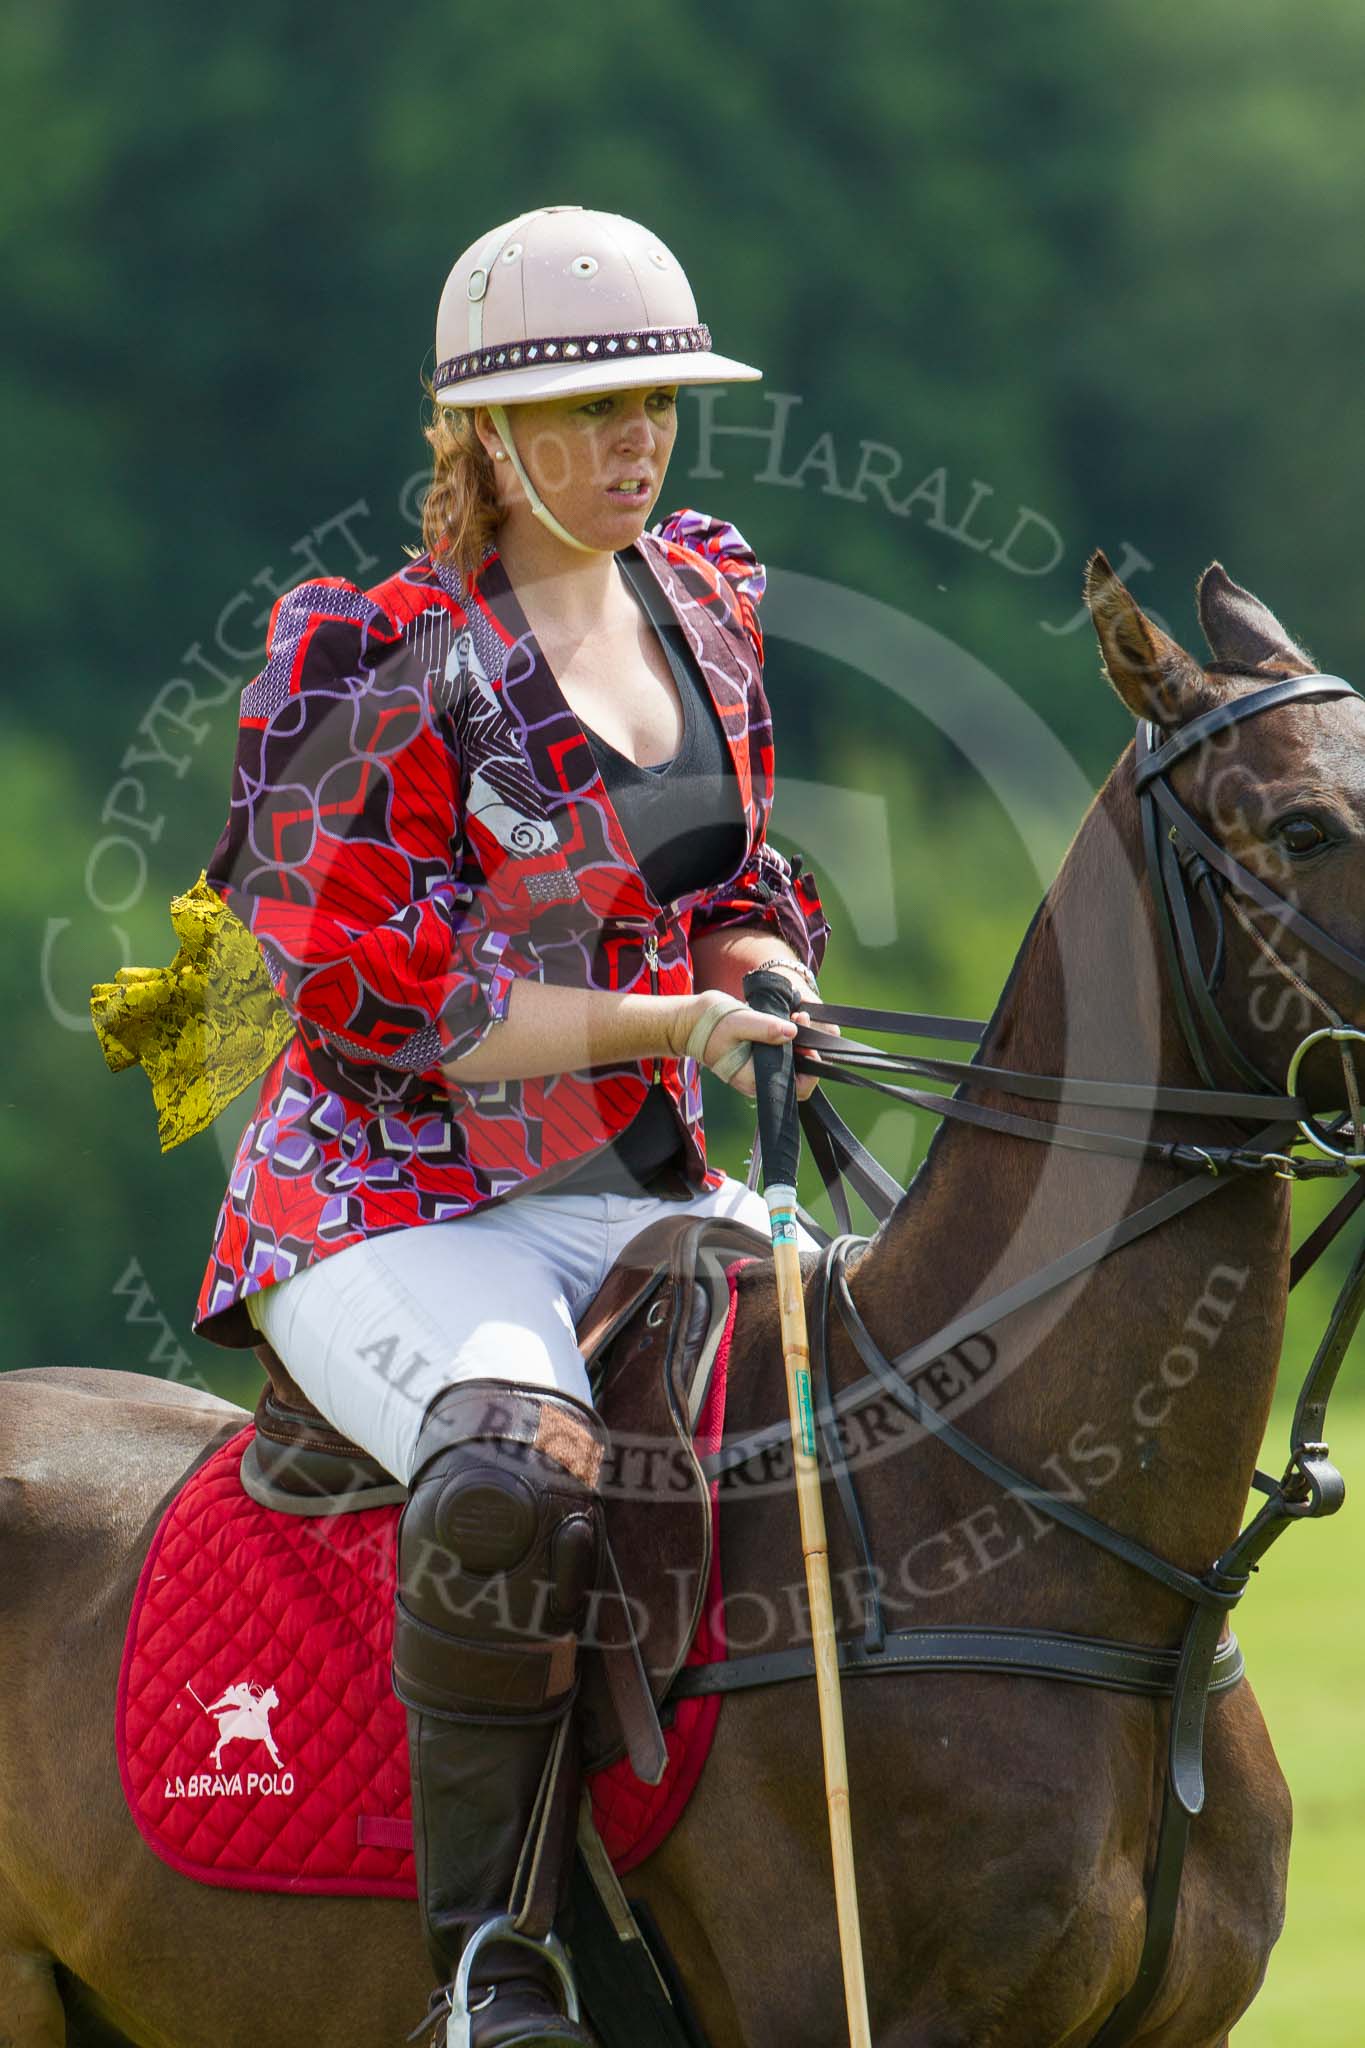 7th Heritage Polo Cup semi-finals: Erin Jones from South Africa wearing DZNY Fashion Design sponsored by AMG PETROENERGY..
Hurtwood Park Polo Club,
Ewhurst Green,
Surrey,
United Kingdom,
on 04 August 2012 at 13:40, image #167